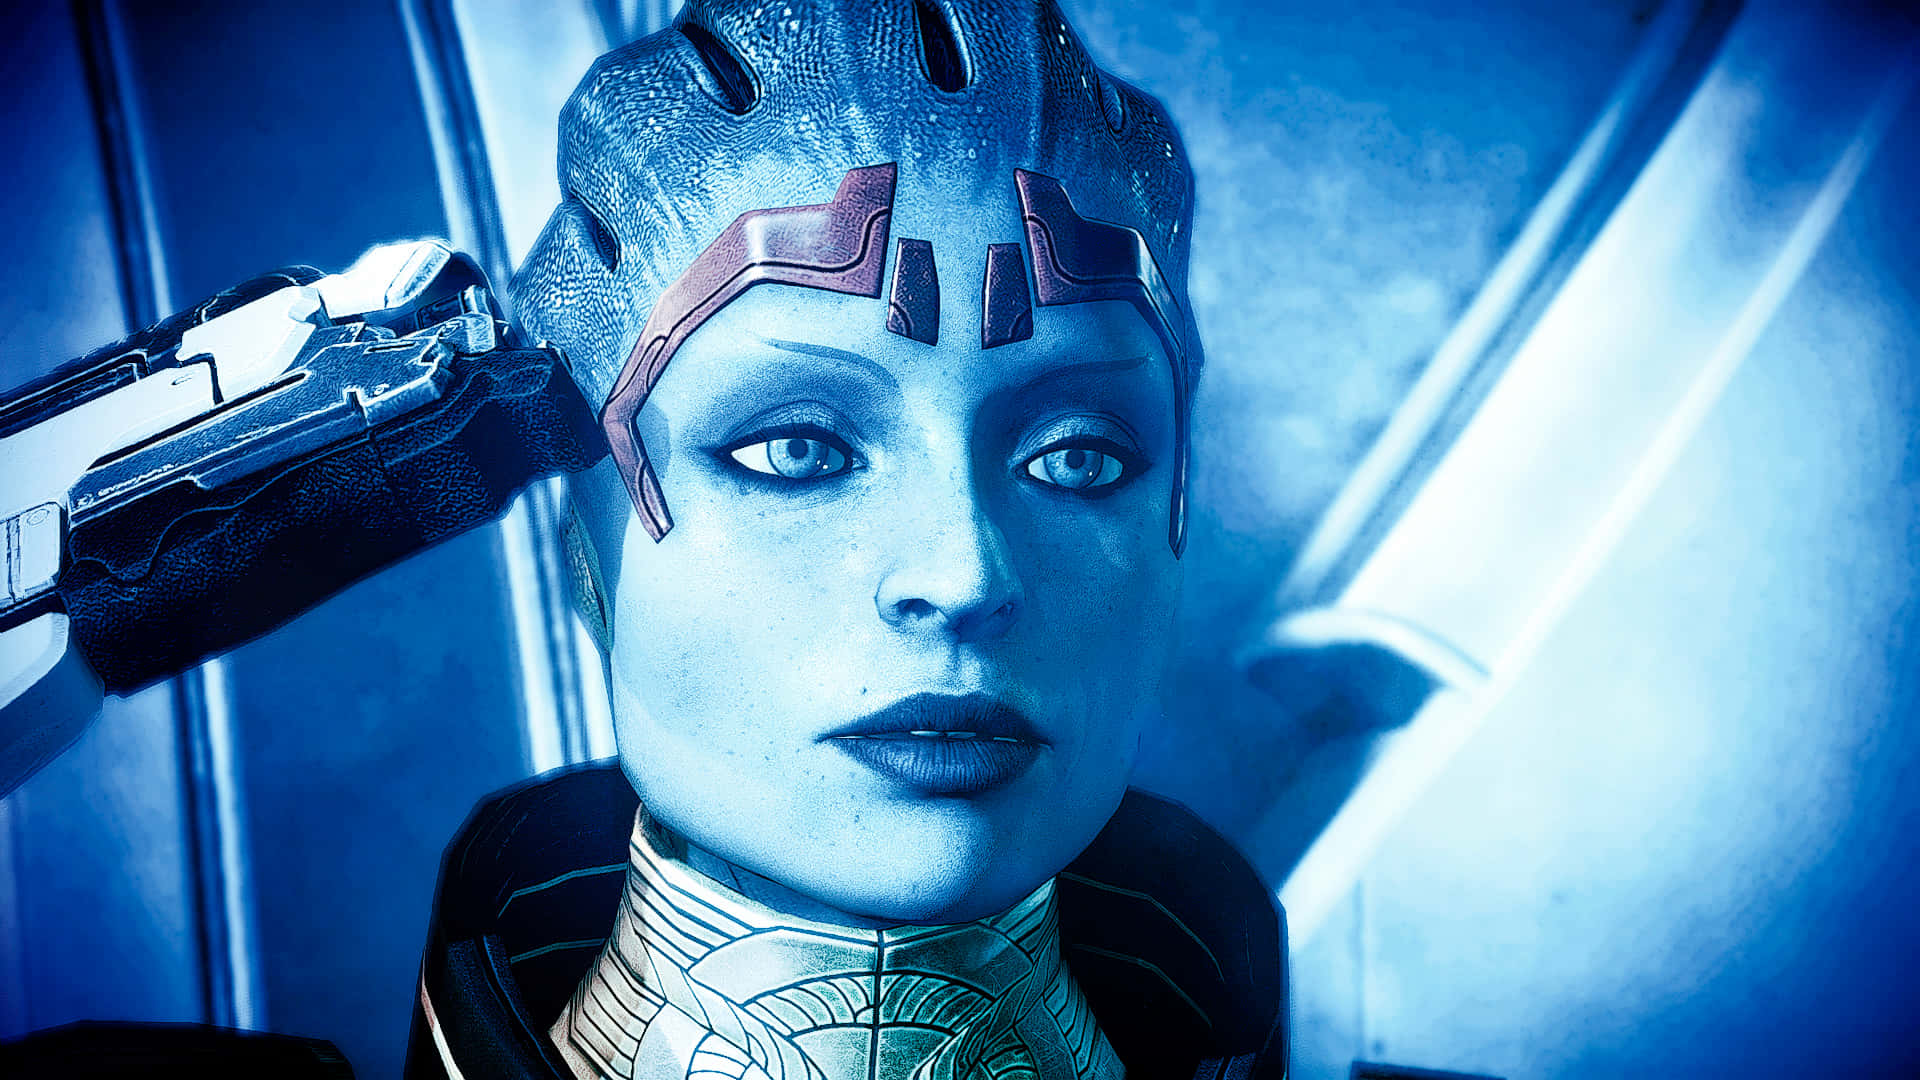 Powerful and Enigmatic Samara from Mass Effect Wallpaper